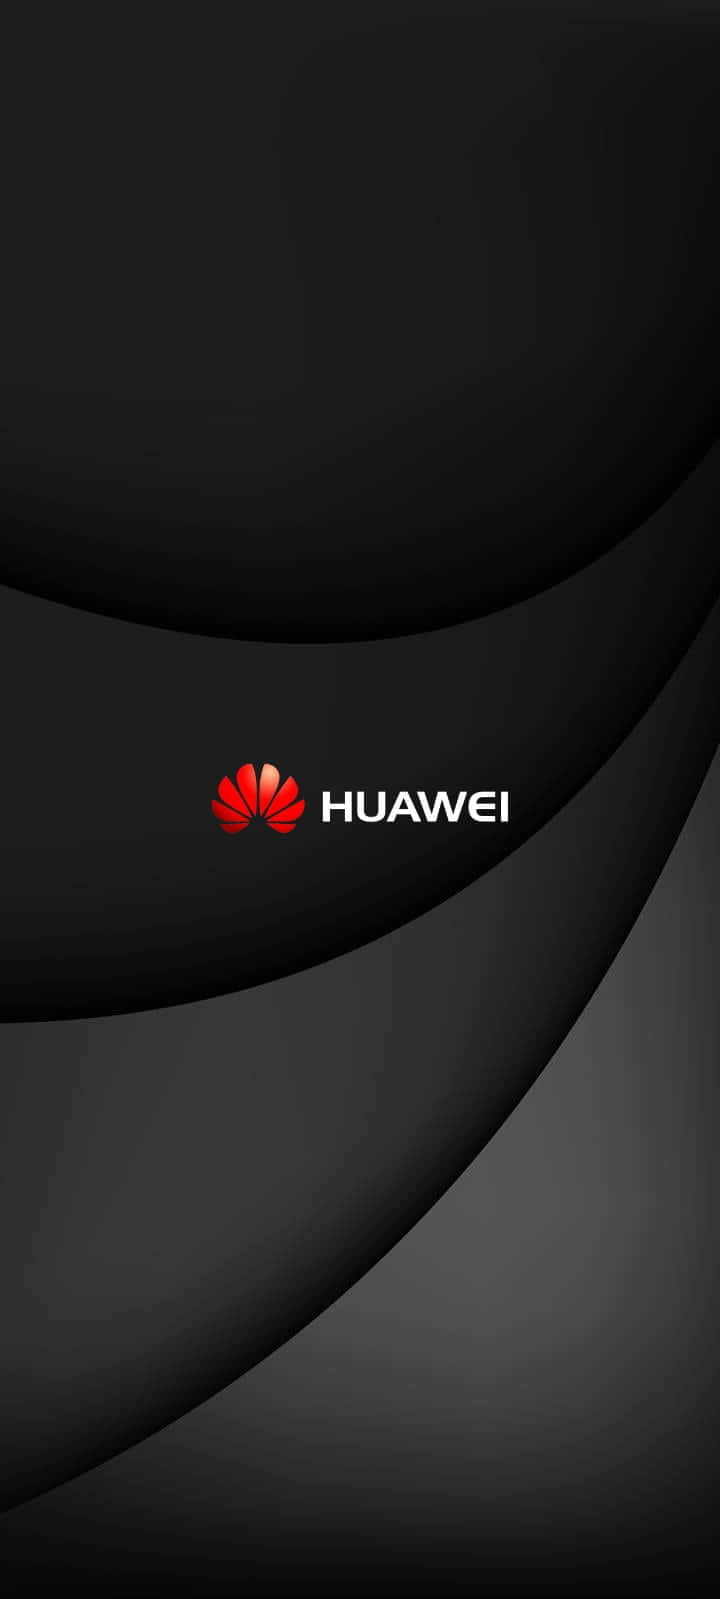 "The Future of Technology: Huawei"